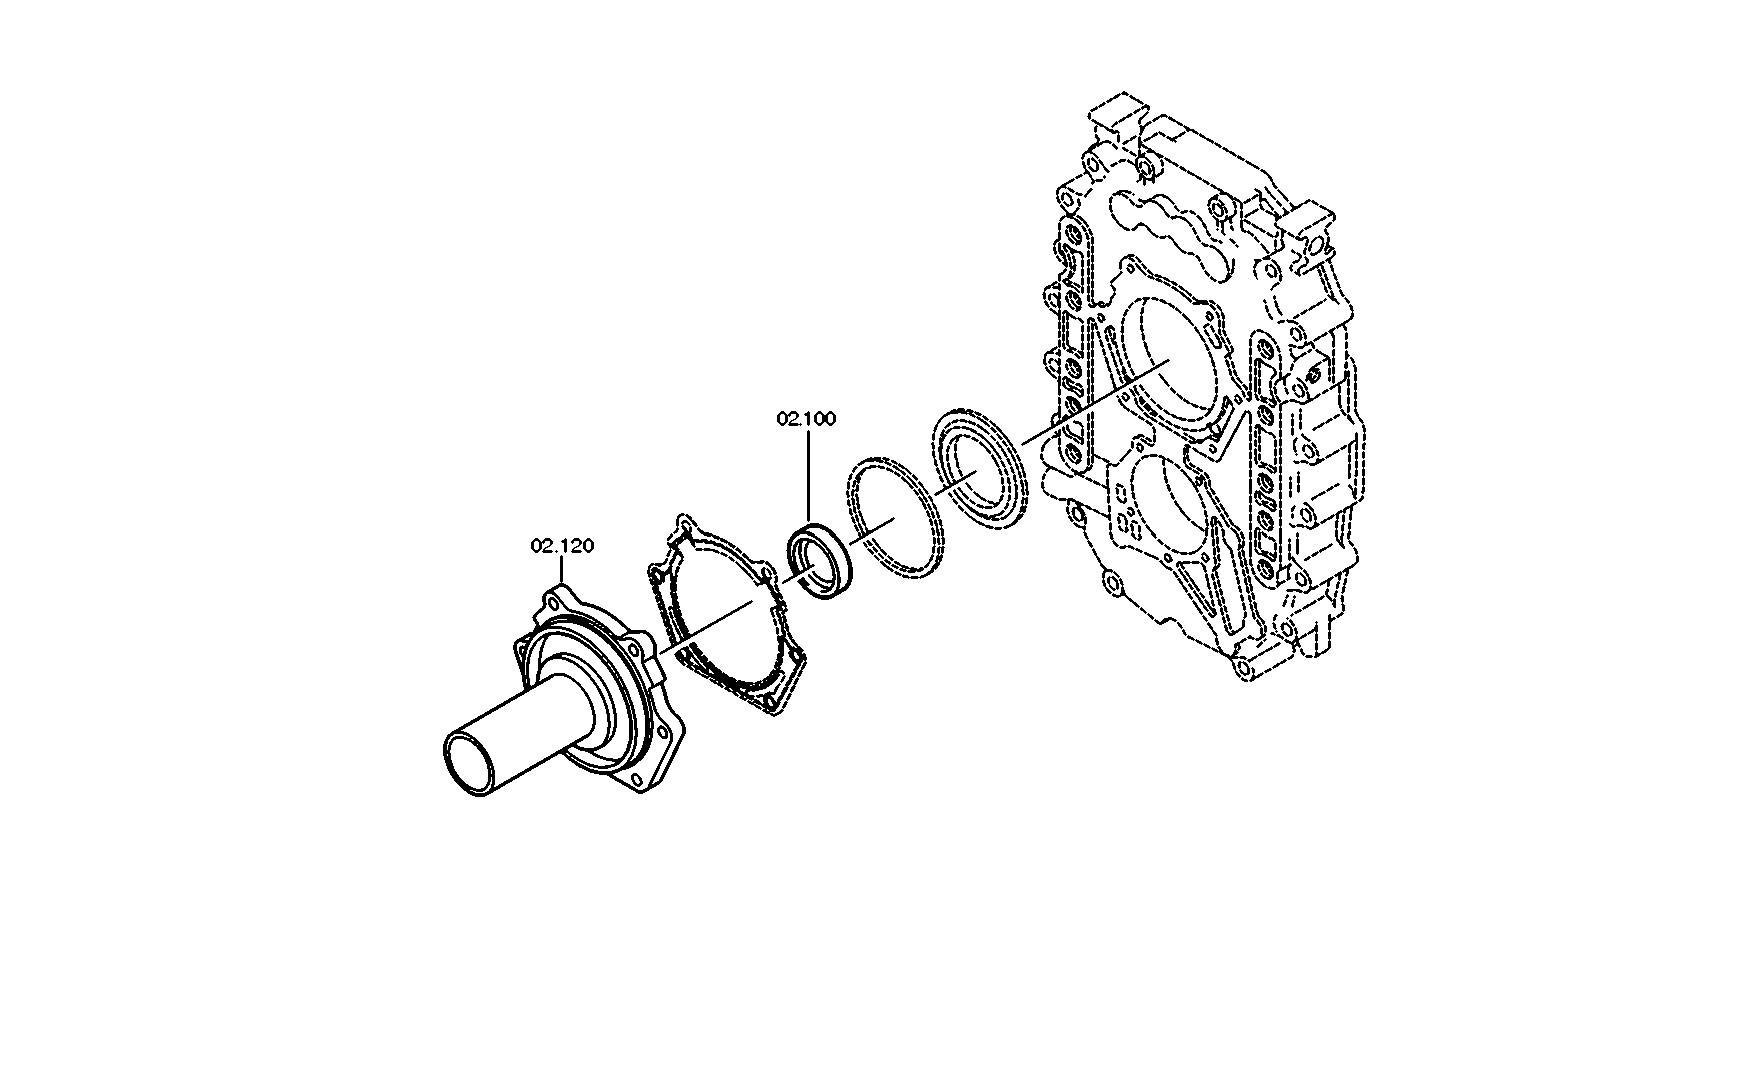 drawing for Astra Veicoli Industriali 114446 - SHAFT SEAL (figure 3)